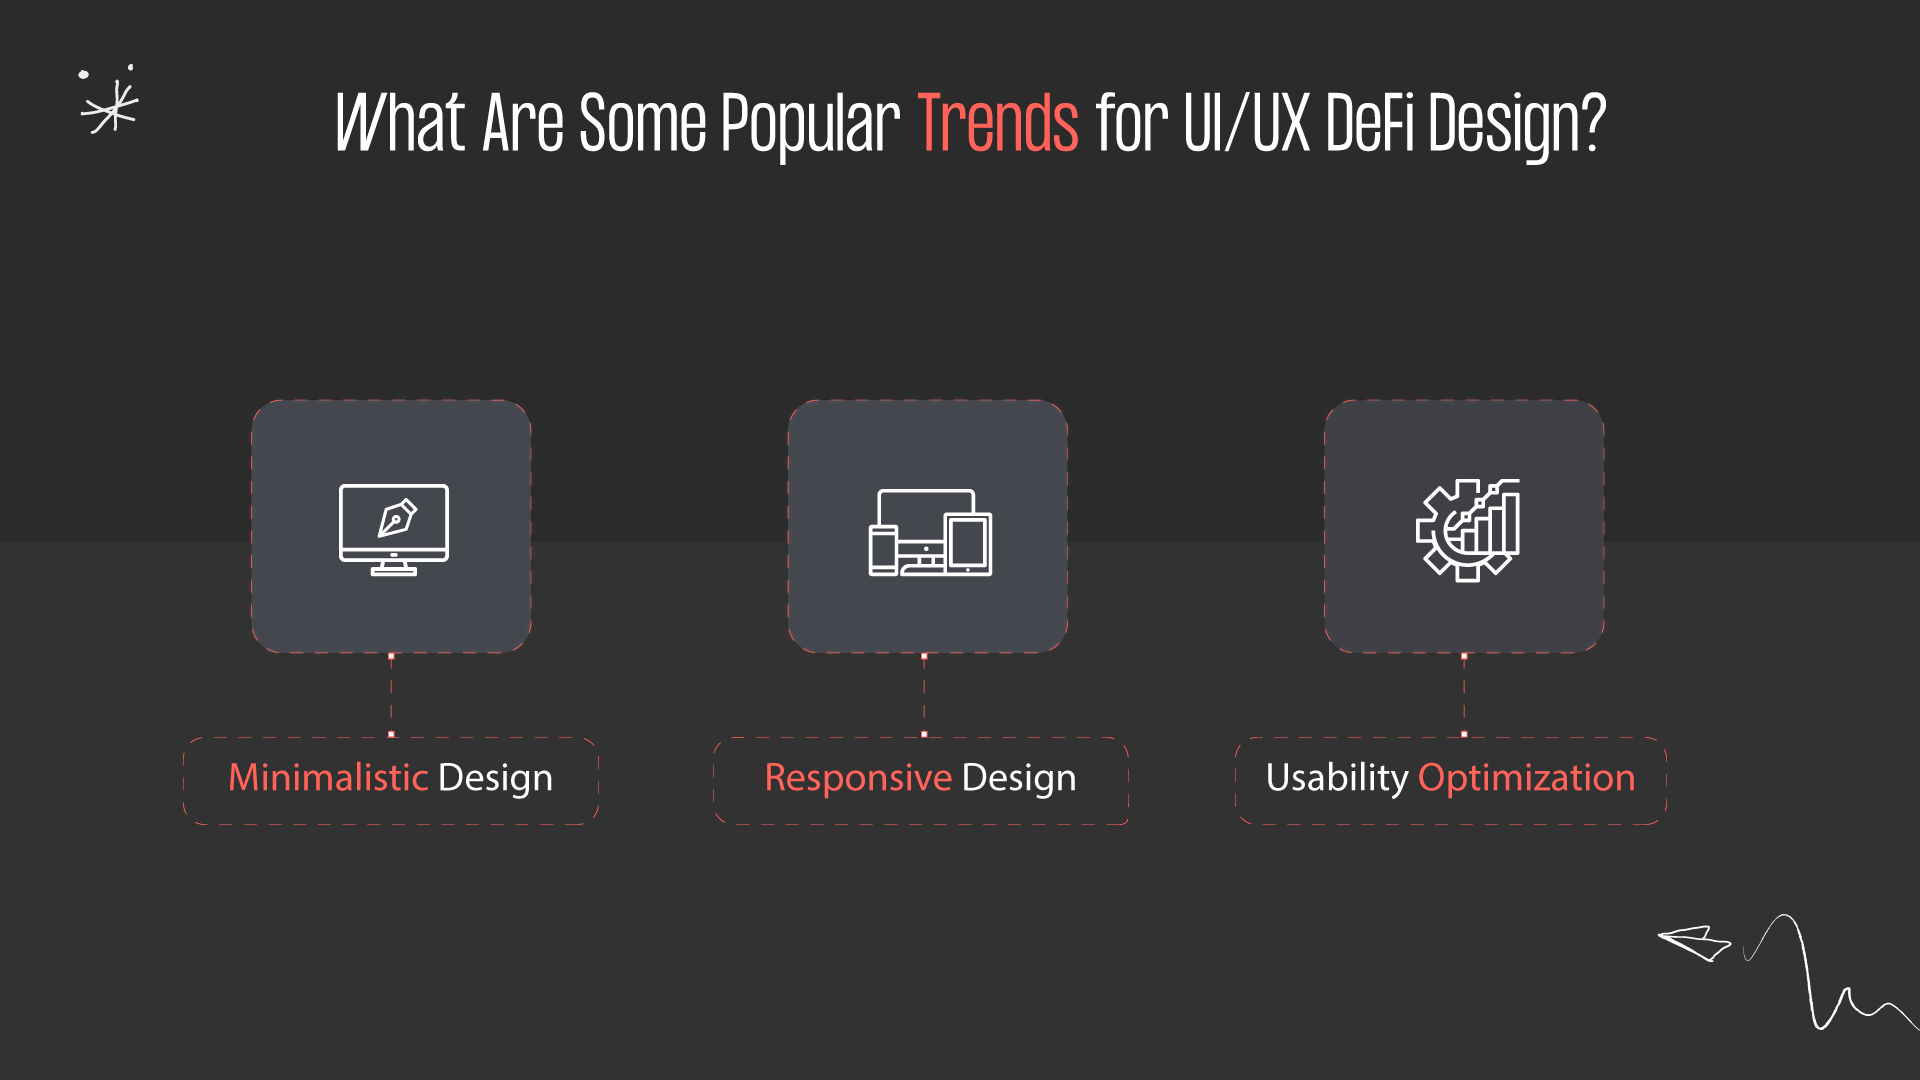 What are the popular trends for UI/UX DeFi design?